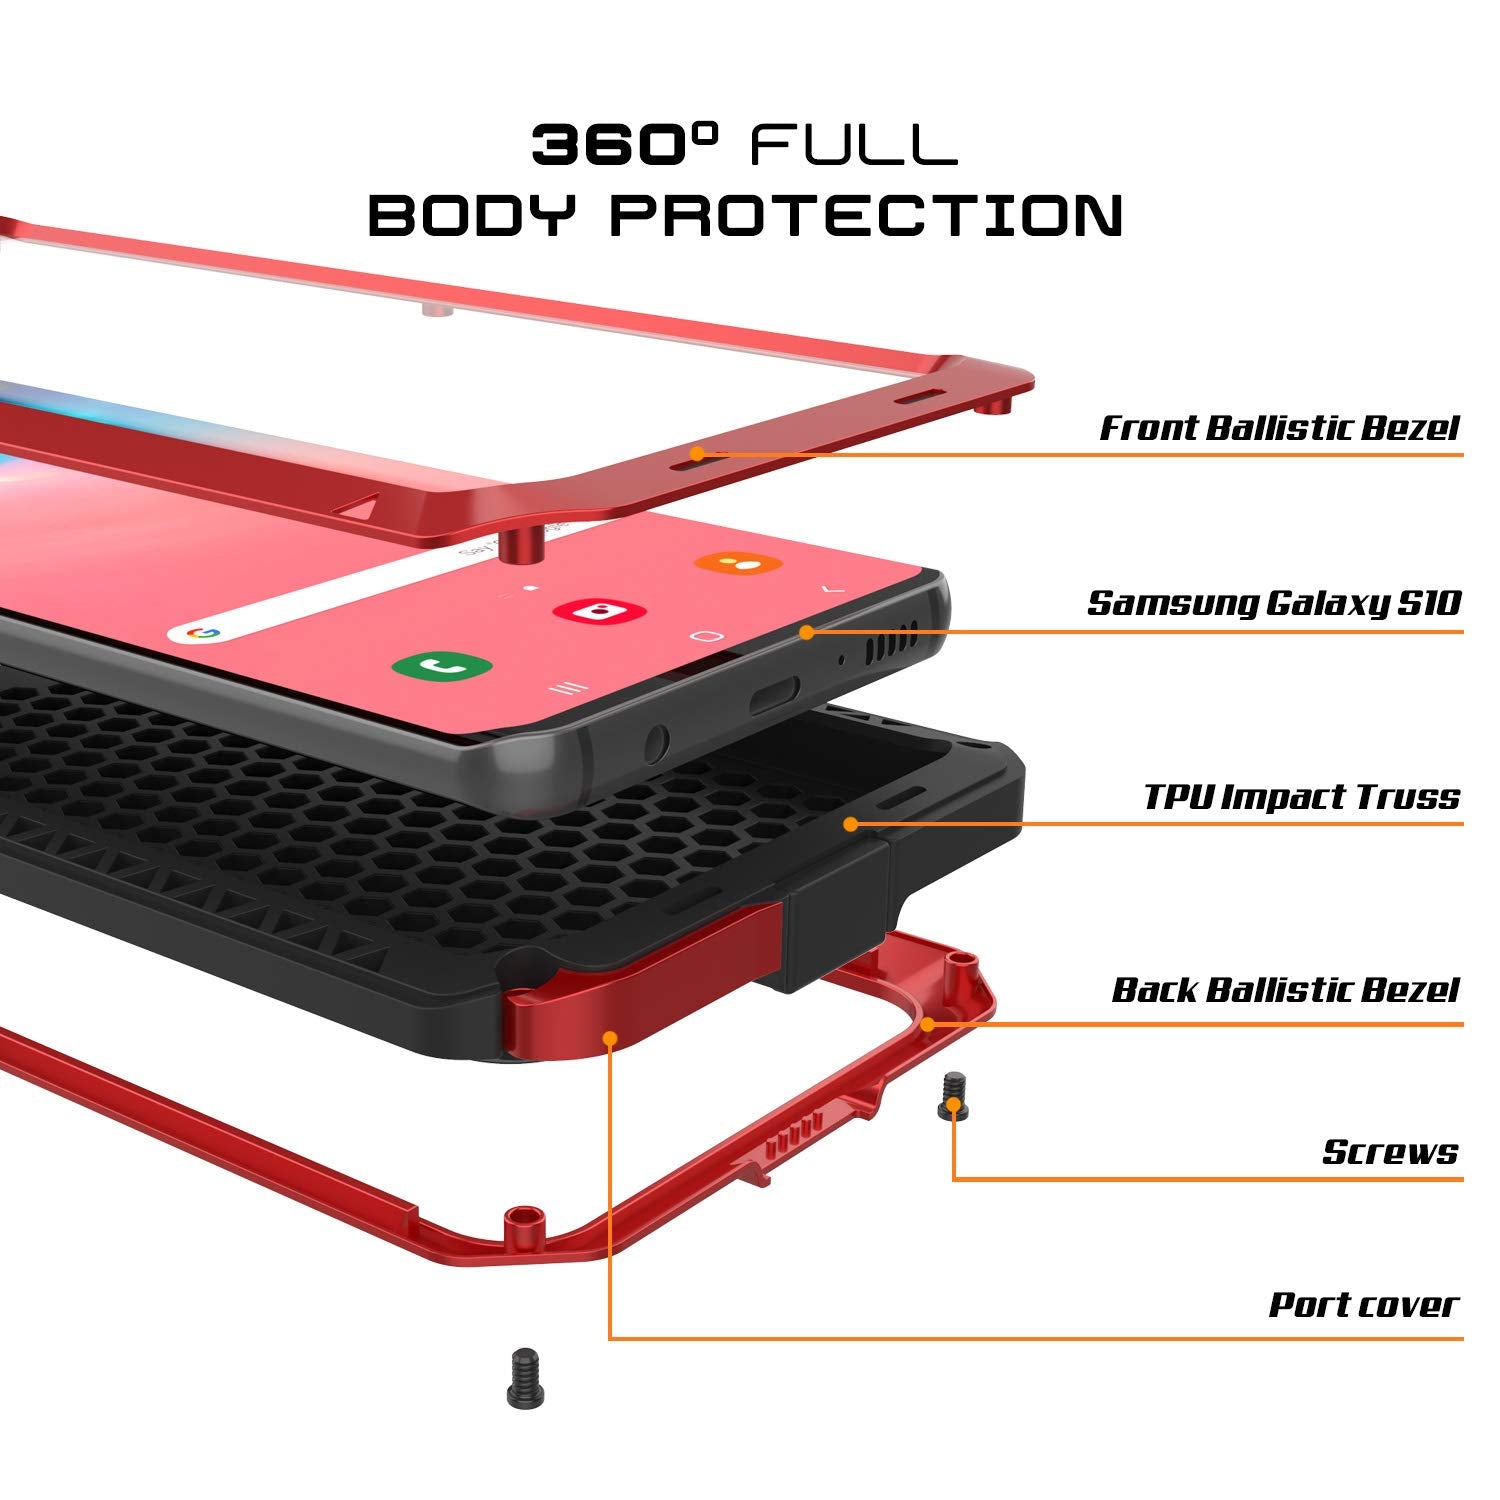 Galaxy S10 Metal Case, Heavy Duty Military Grade Rugged Armor Cover [Red]